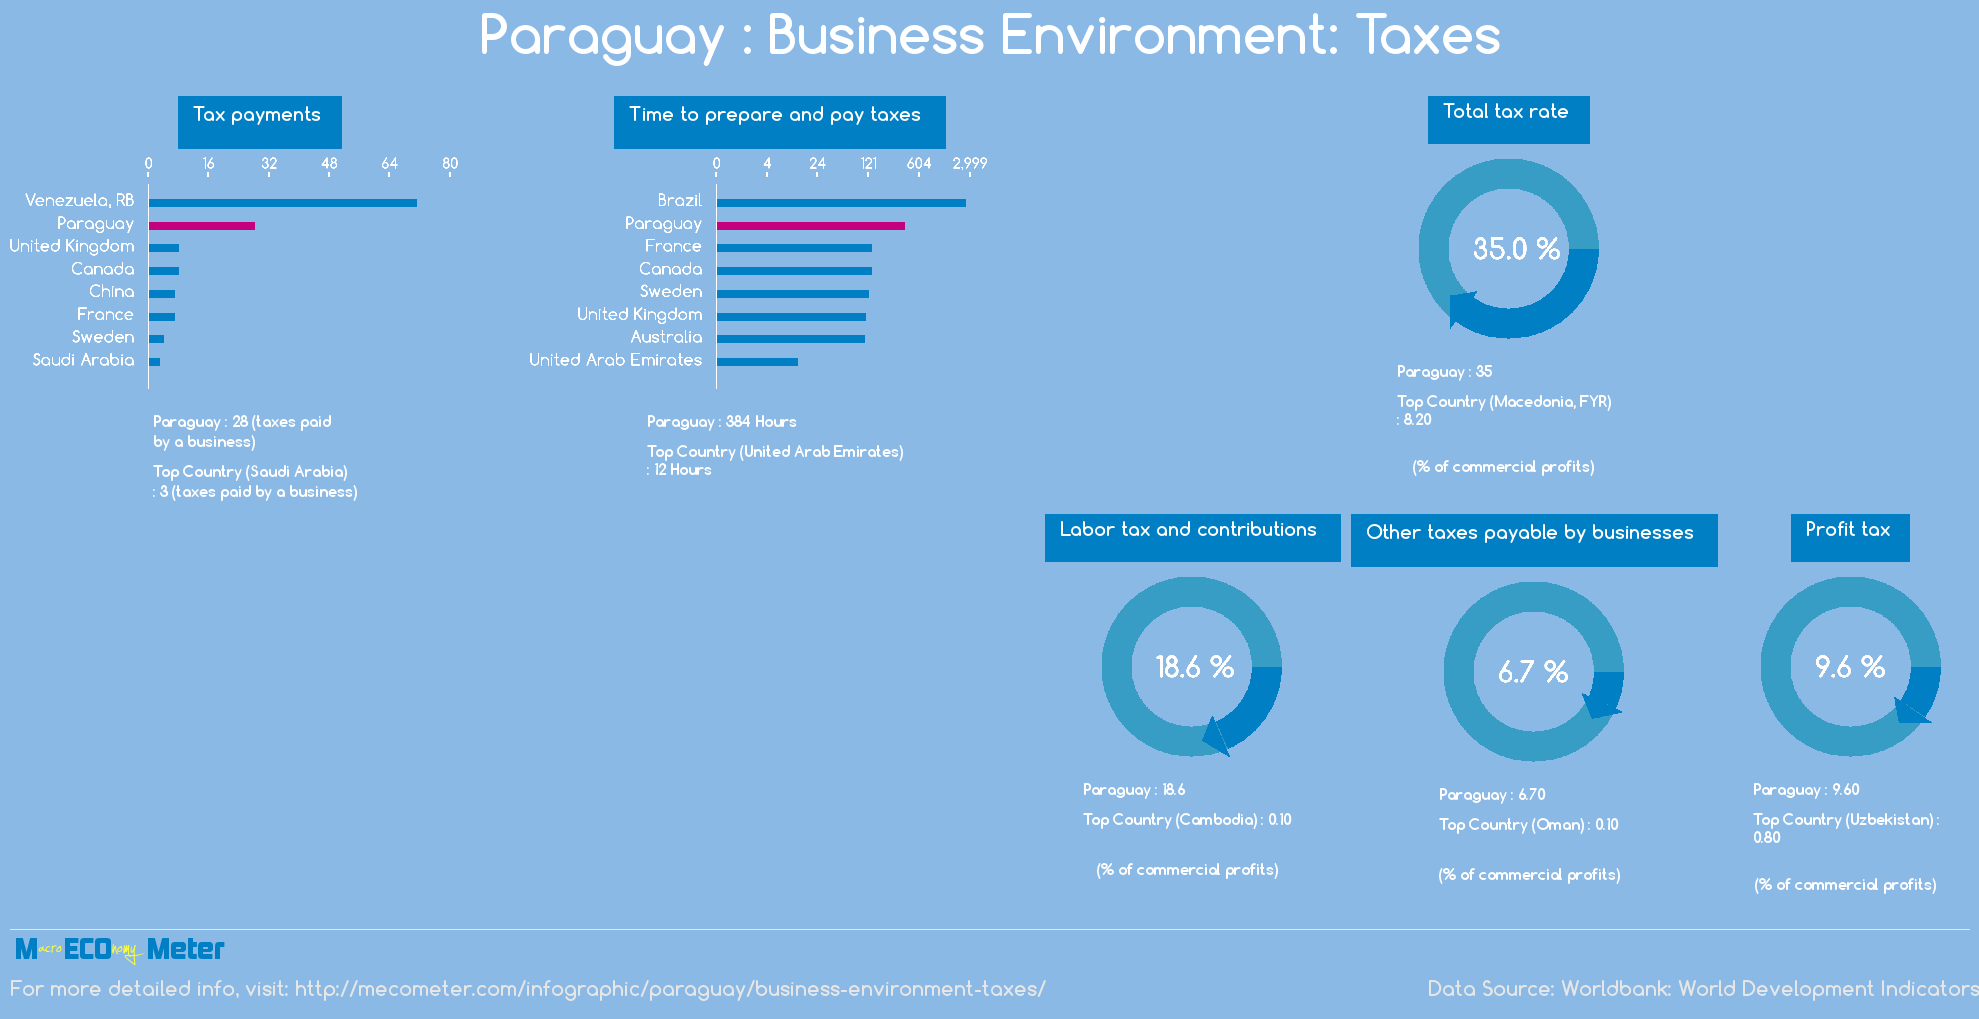 Paraguay : Business Environment: Taxes